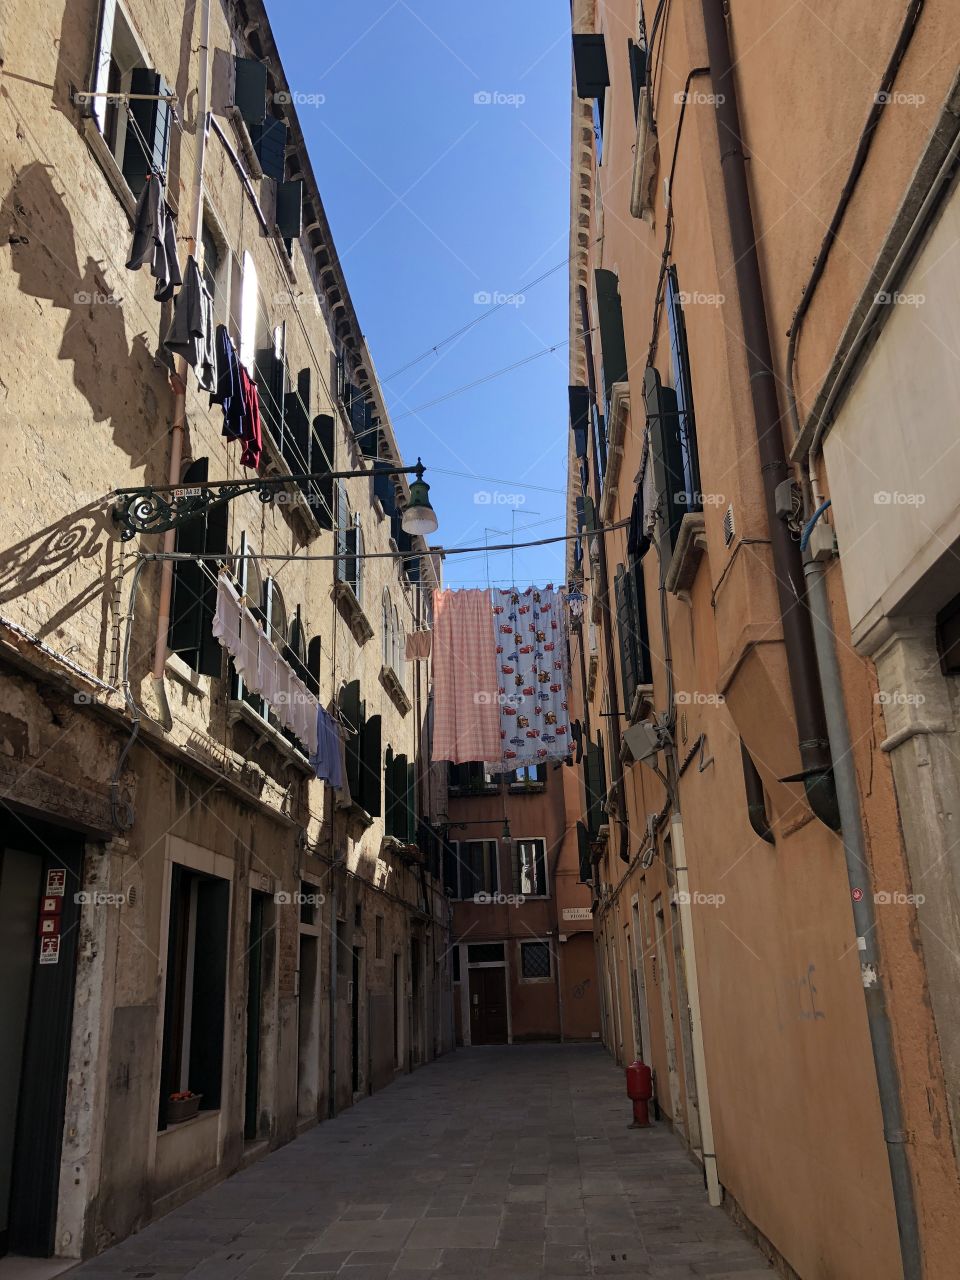 Washing hanging up in street in Venice italy October 2018